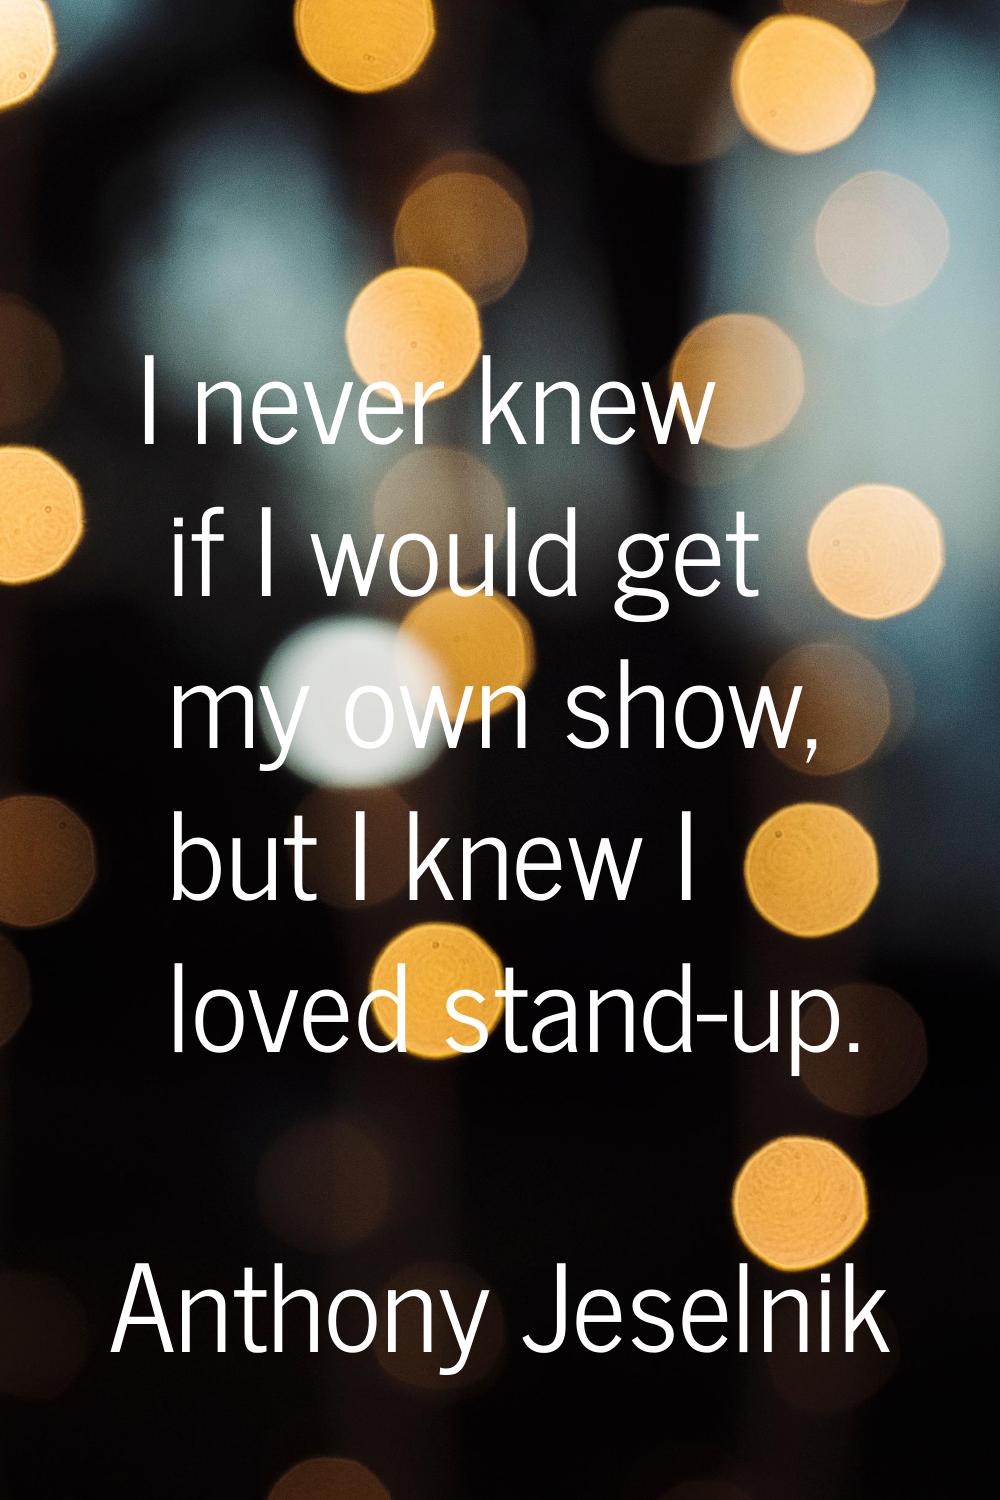 I never knew if I would get my own show, but I knew I loved stand-up.